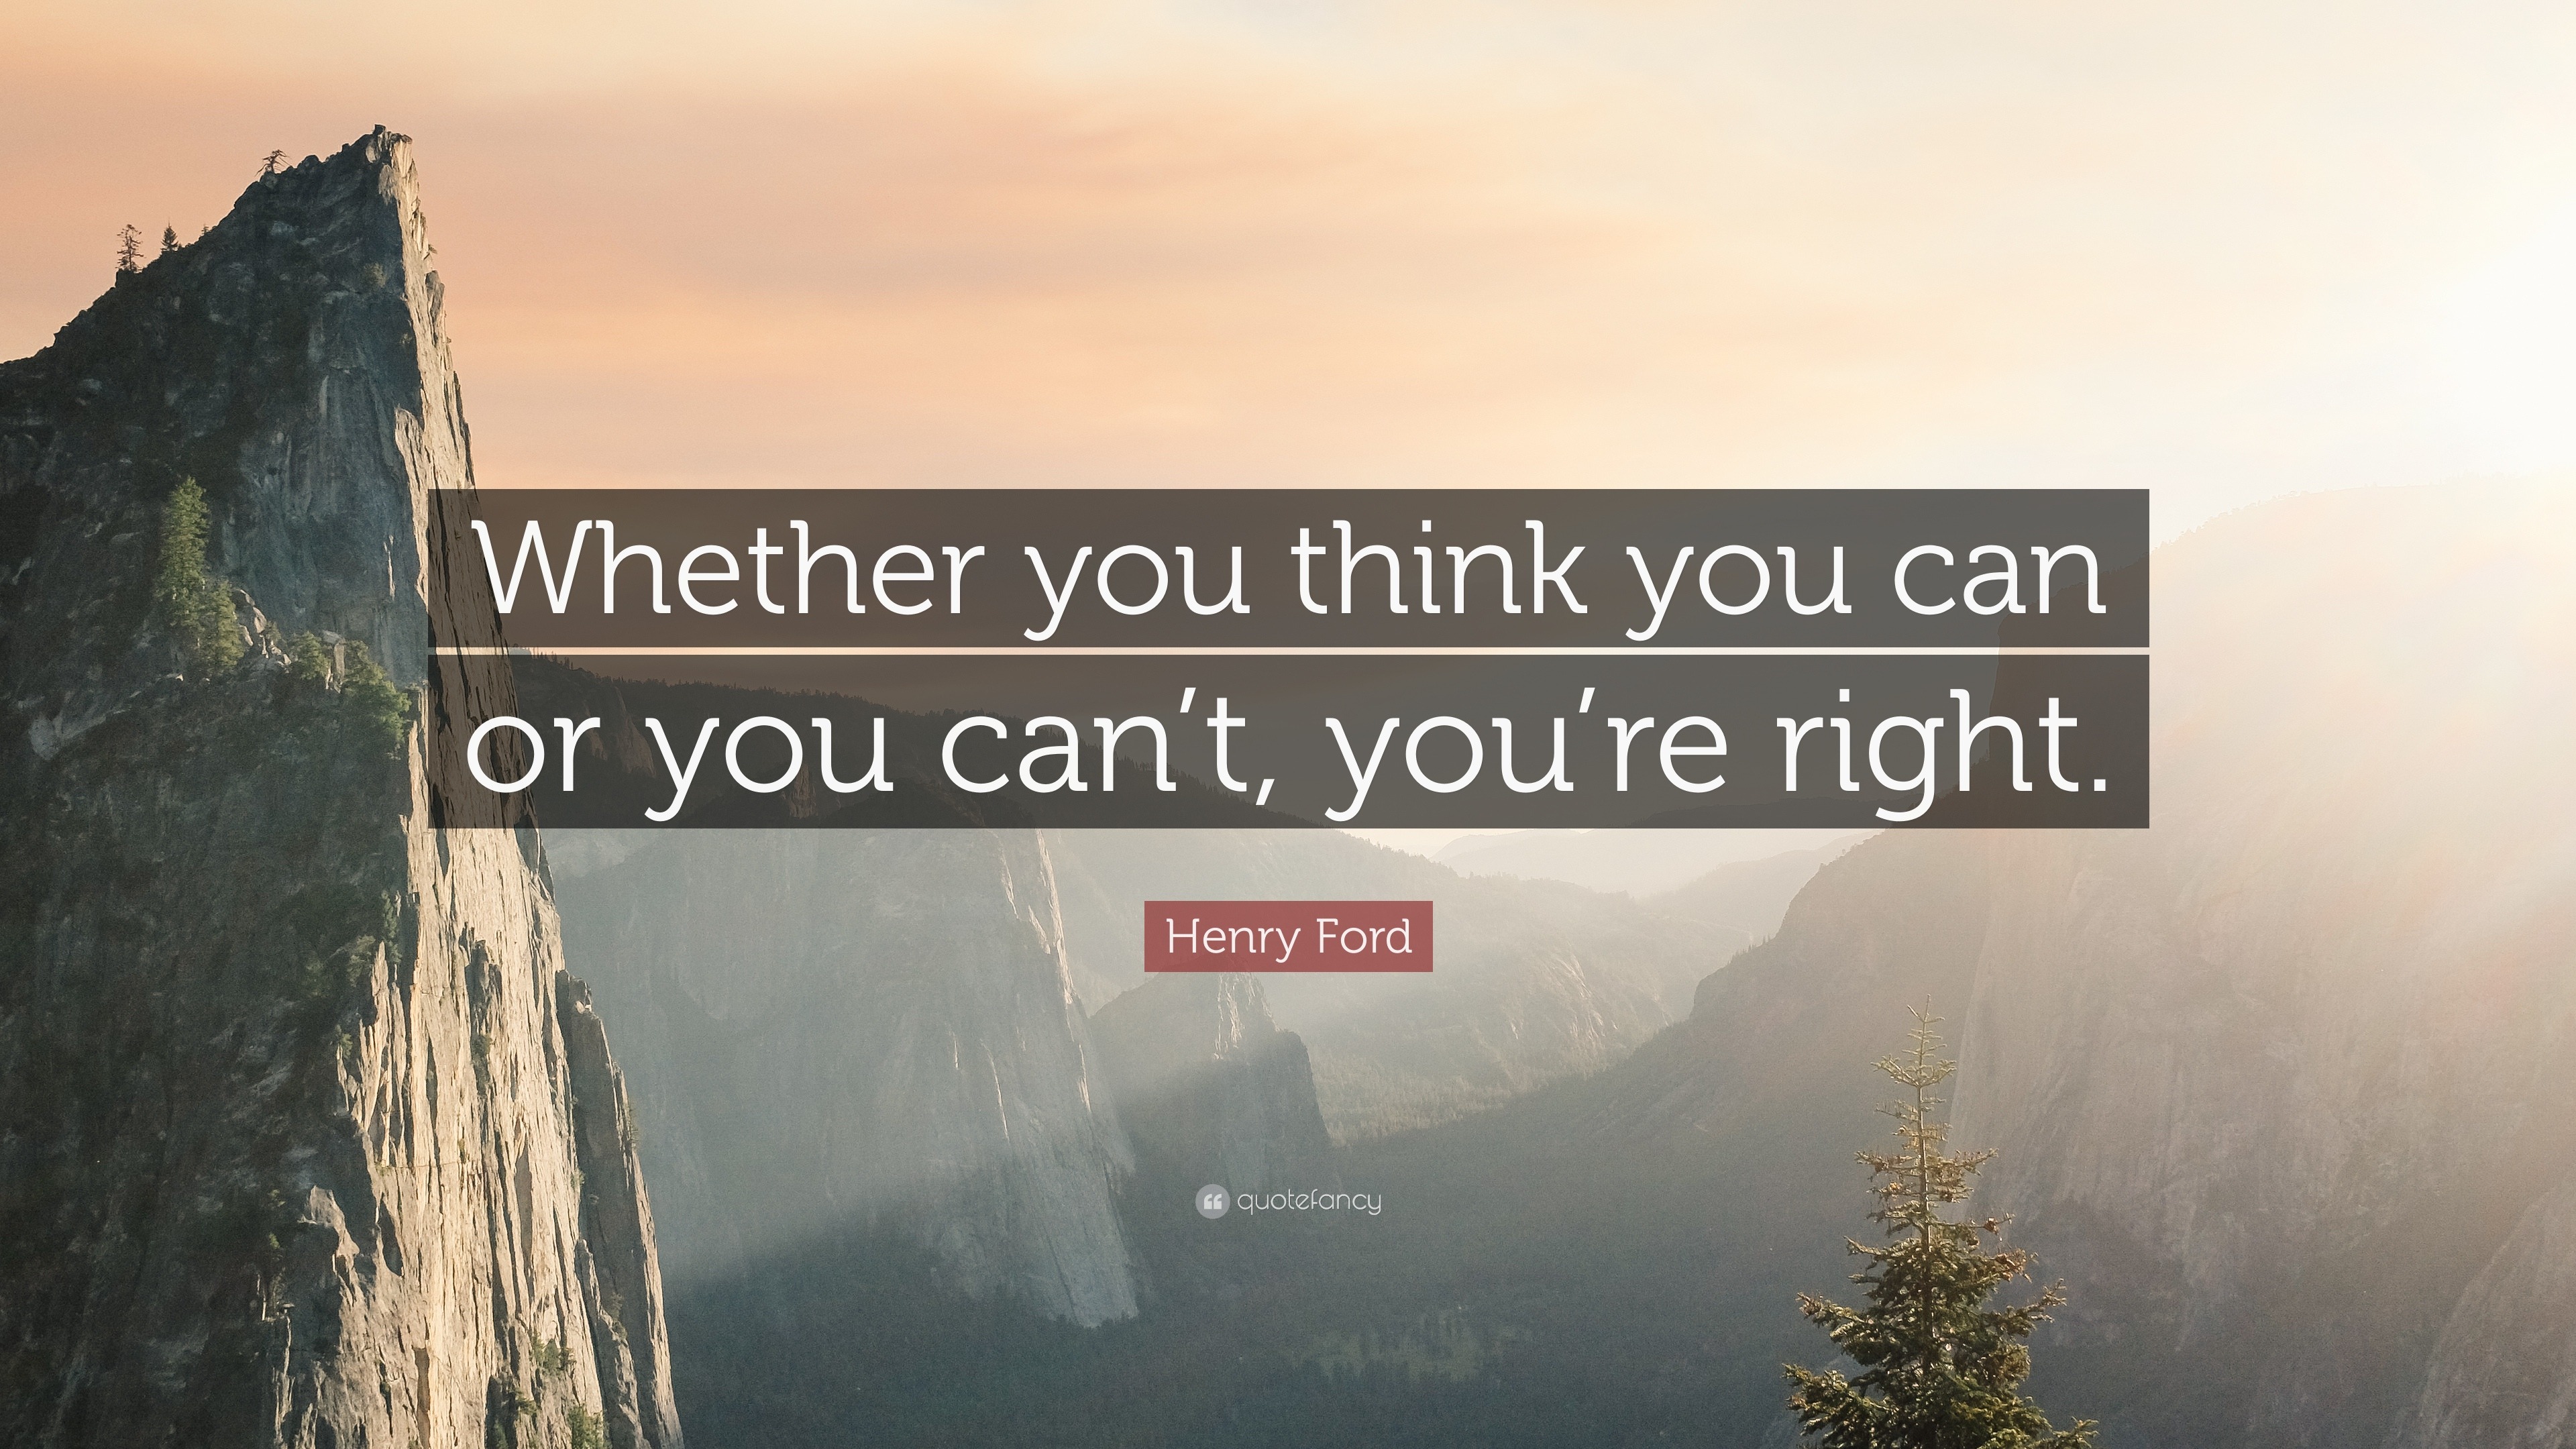 Whether you think you can henry ford quote meaning #3